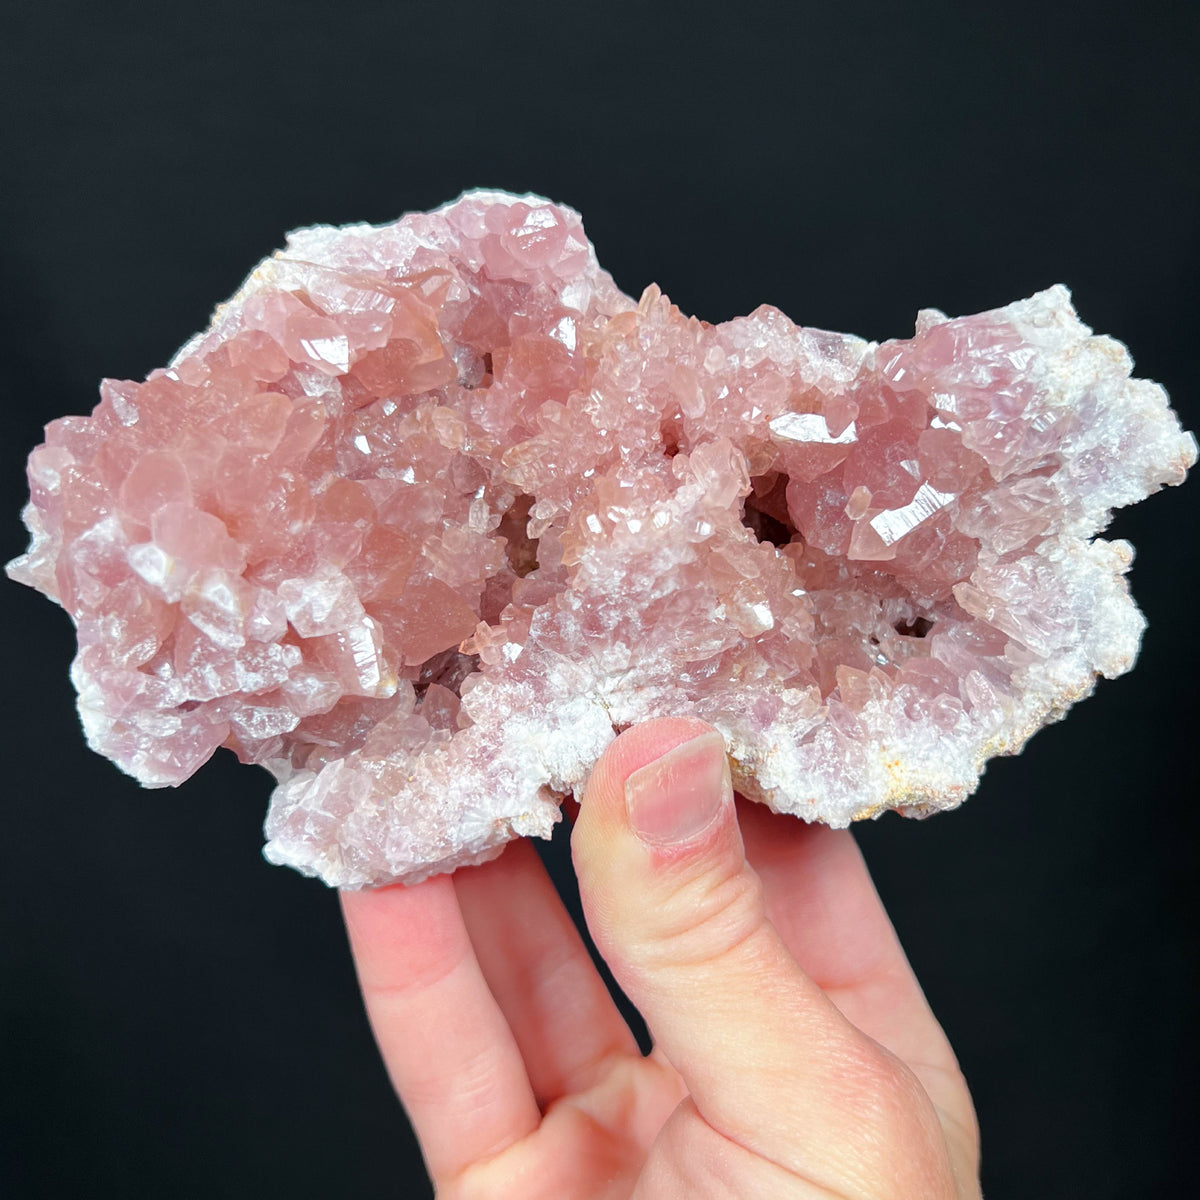 Pink Amethyst Crystal Geode from Argentina